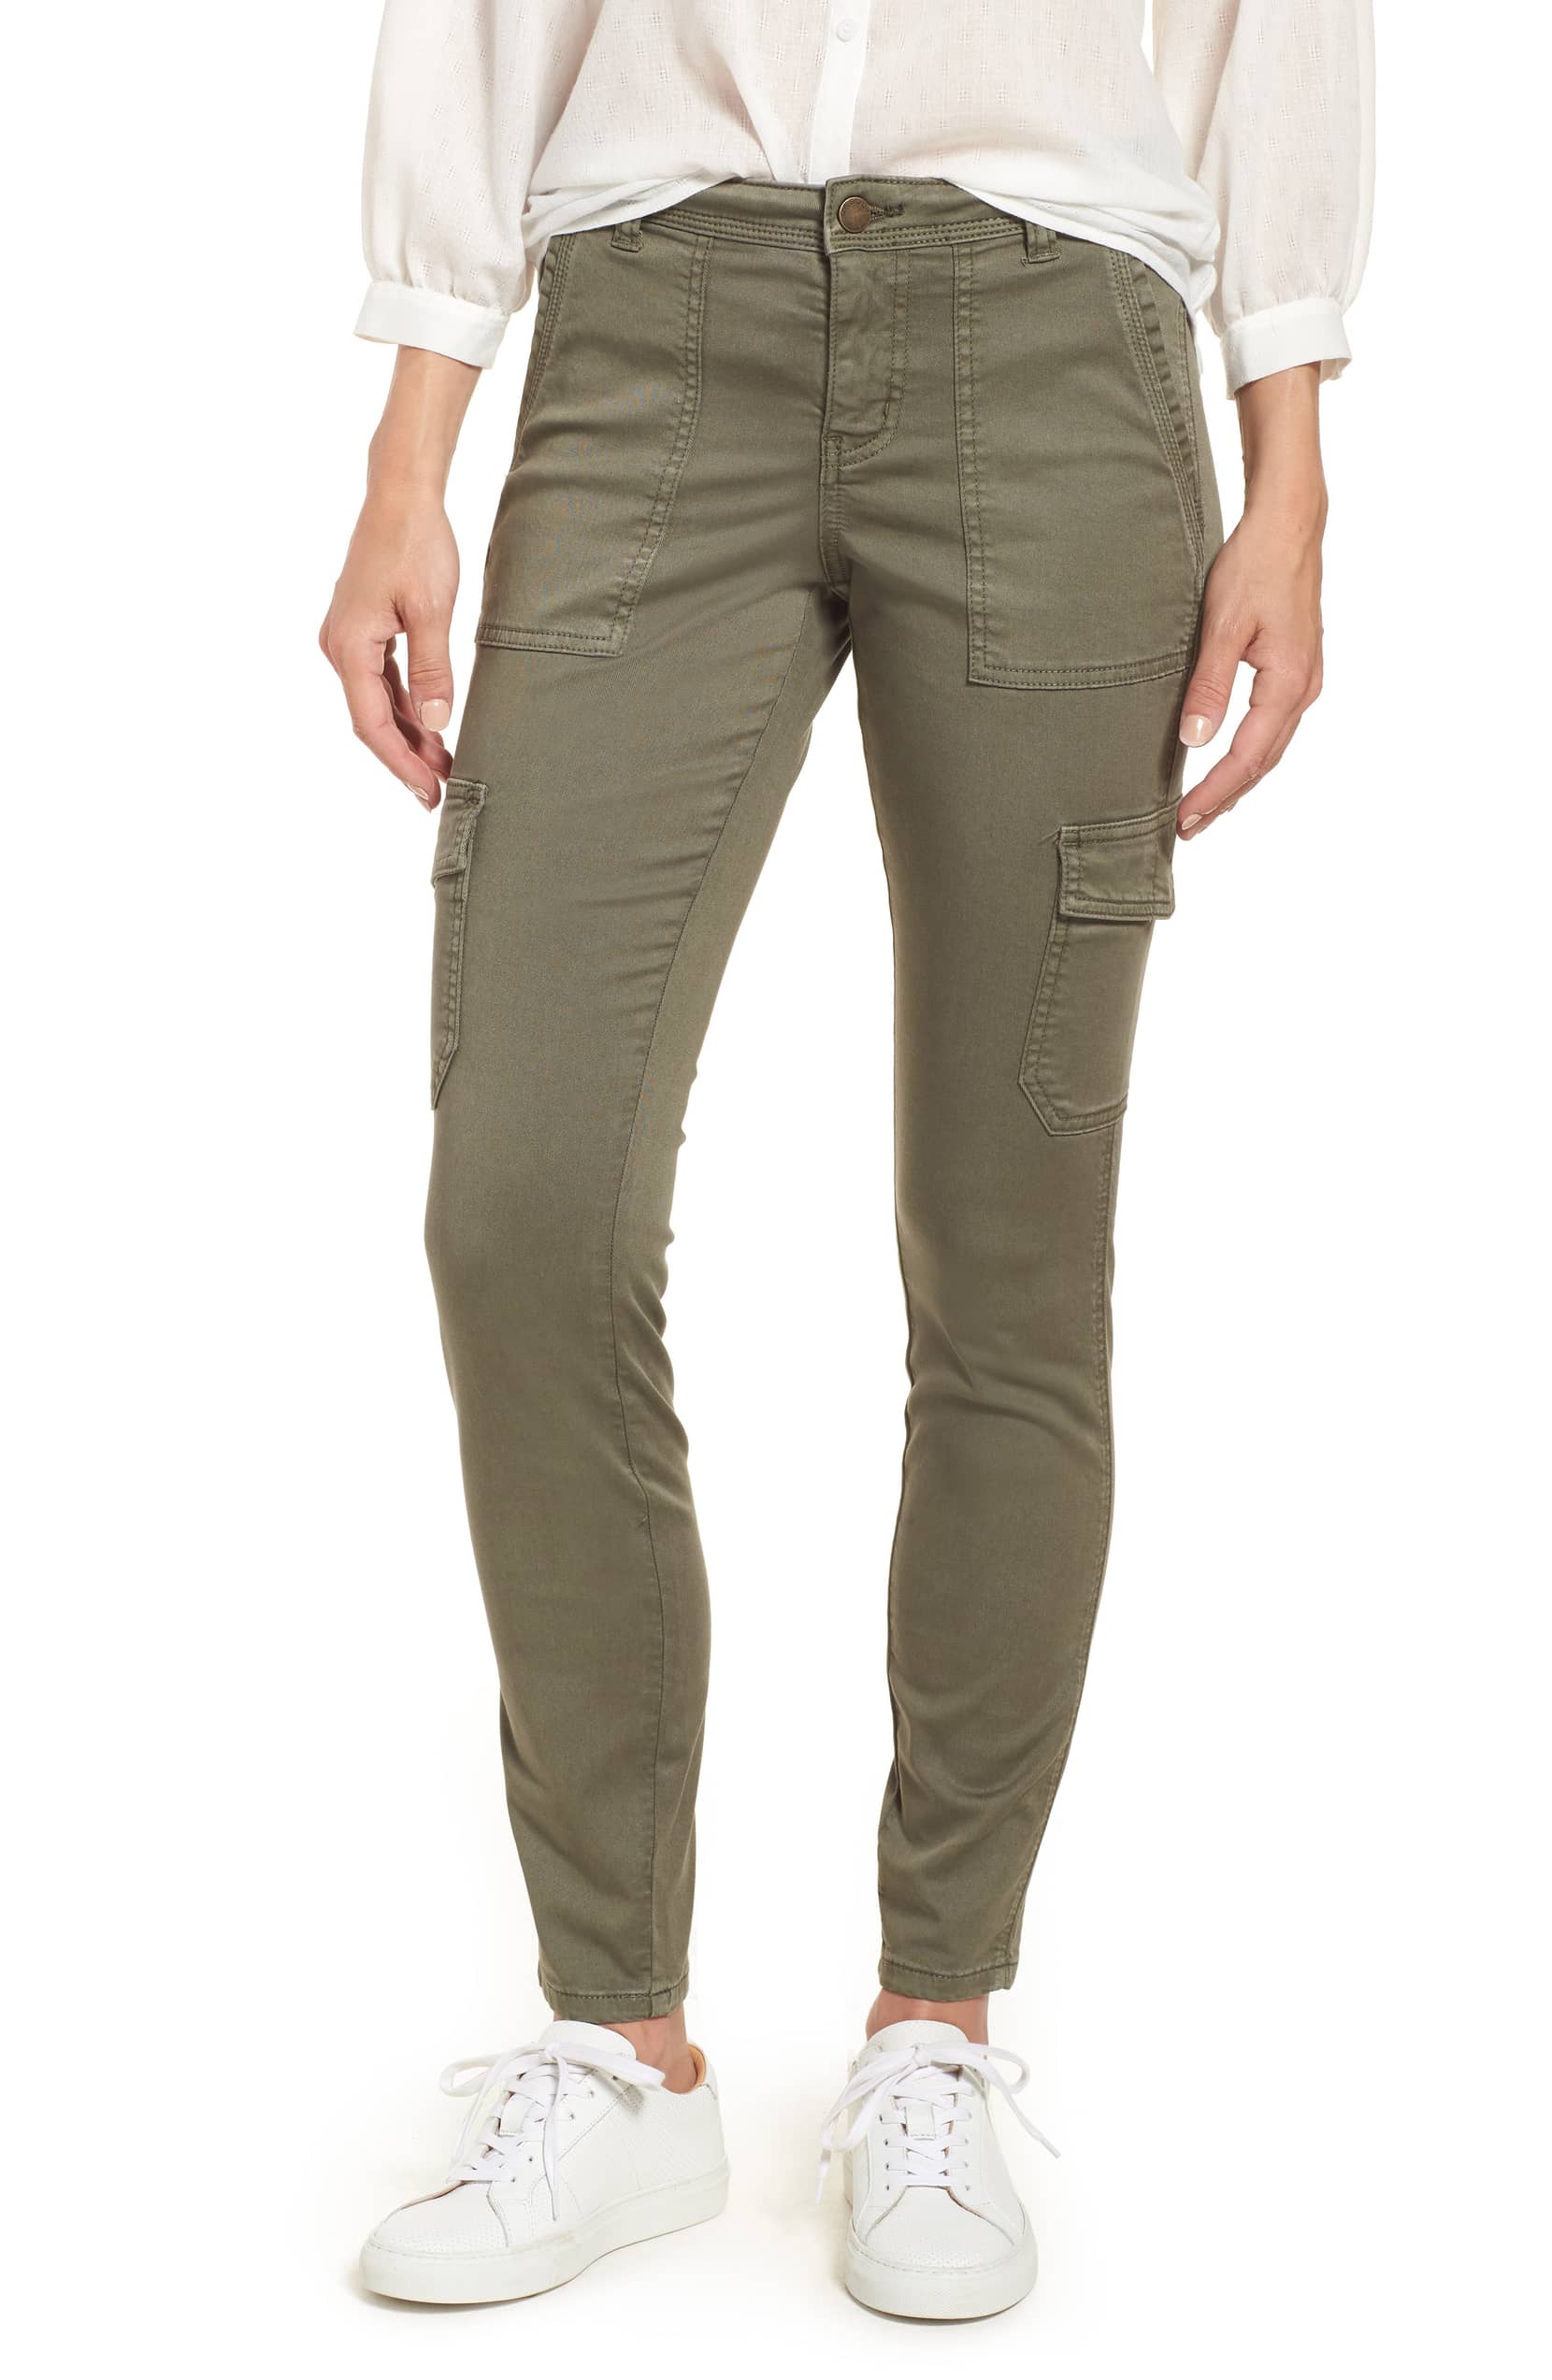 These Utility Pants Are Perfect for Throw and Go Looks